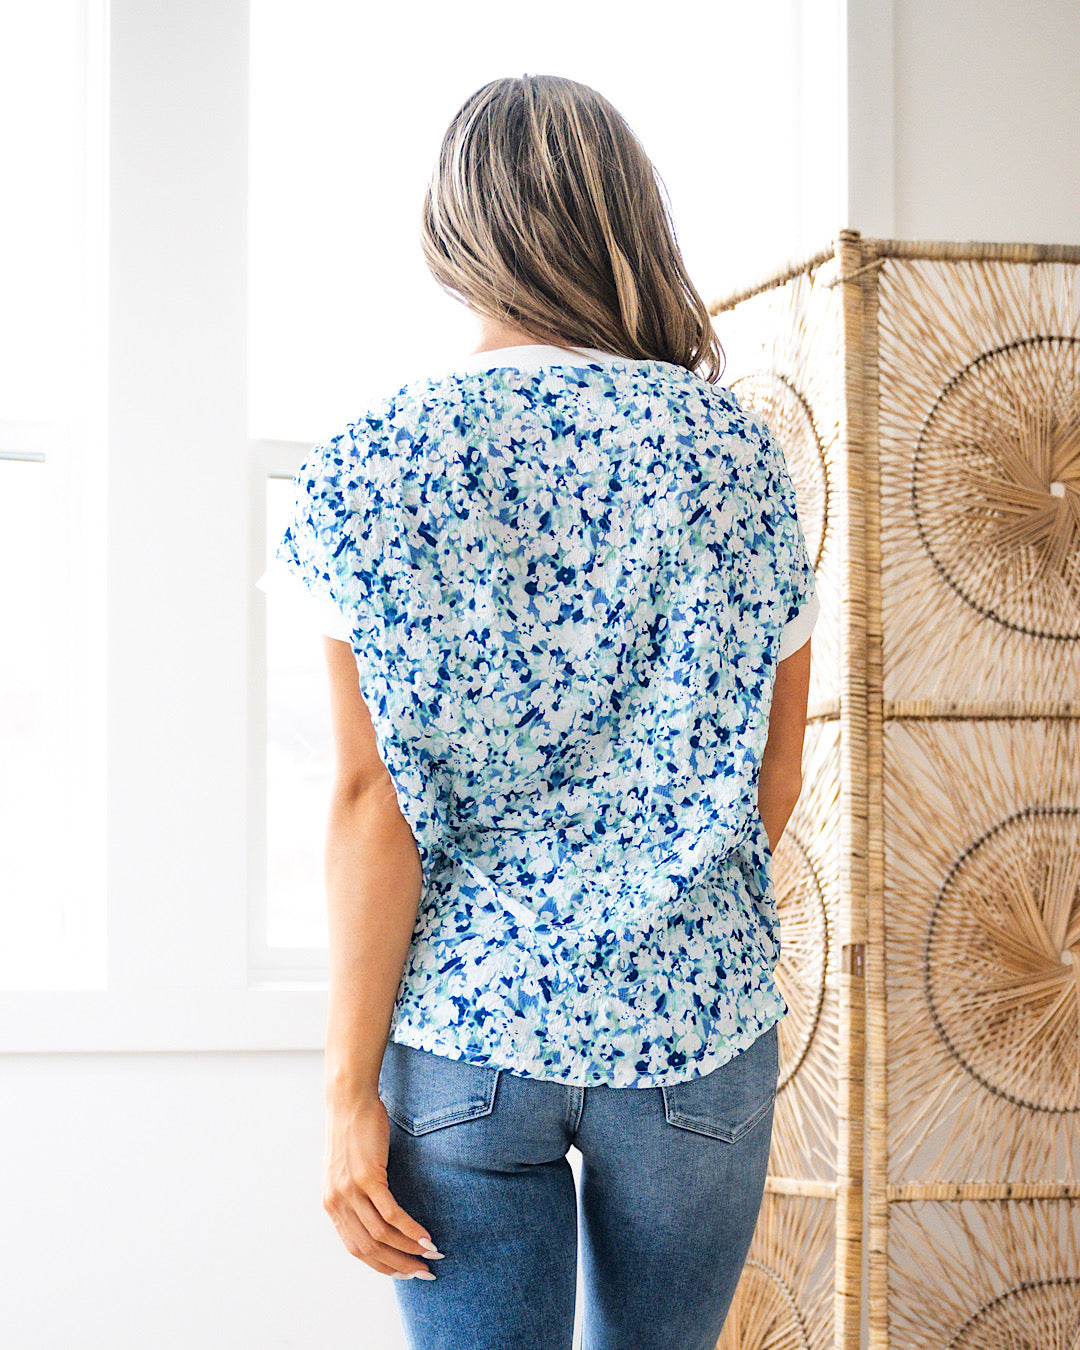 NEW! Change Yourself Textured Blue Floral Top  Sew In Love   